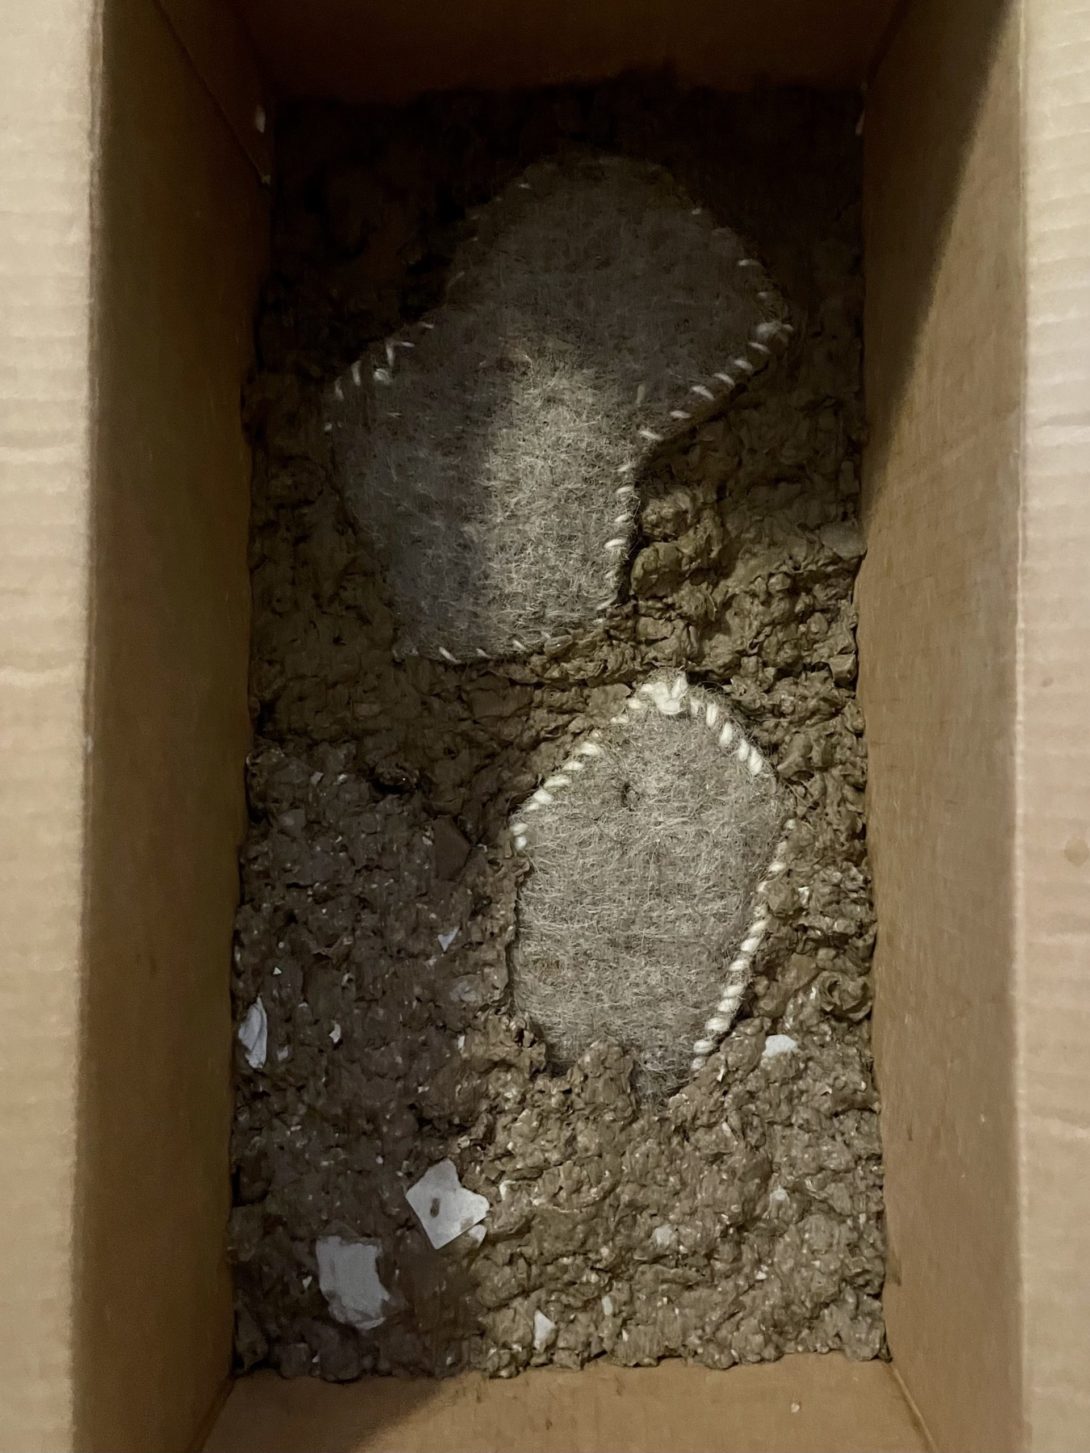 Cardboard box with wool forms being packed in with wet paper pulp.